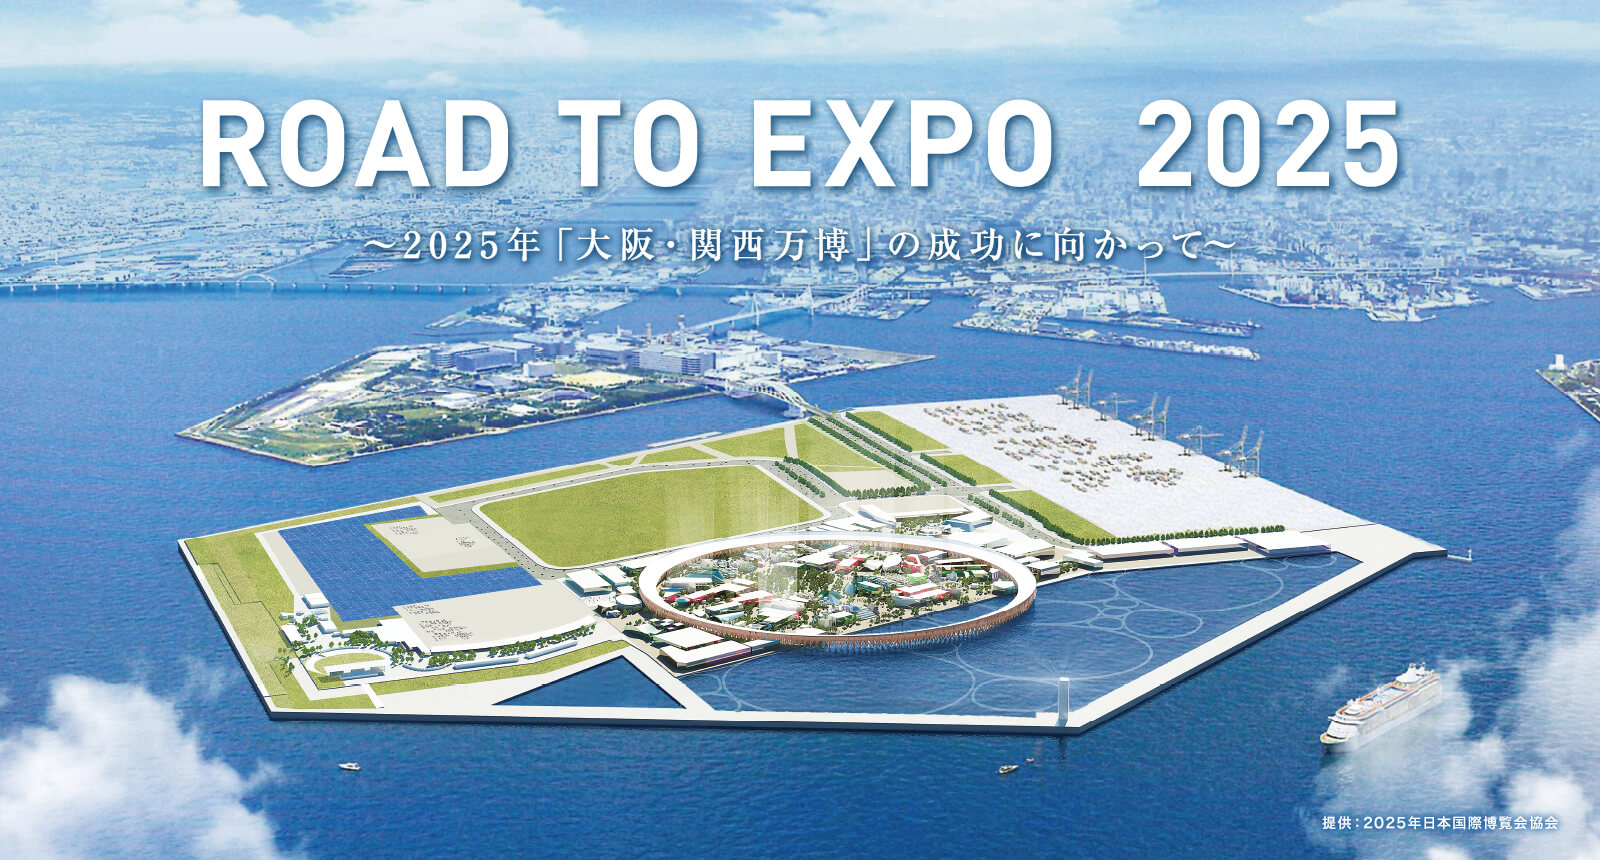 ROAD TO EXPO 2025